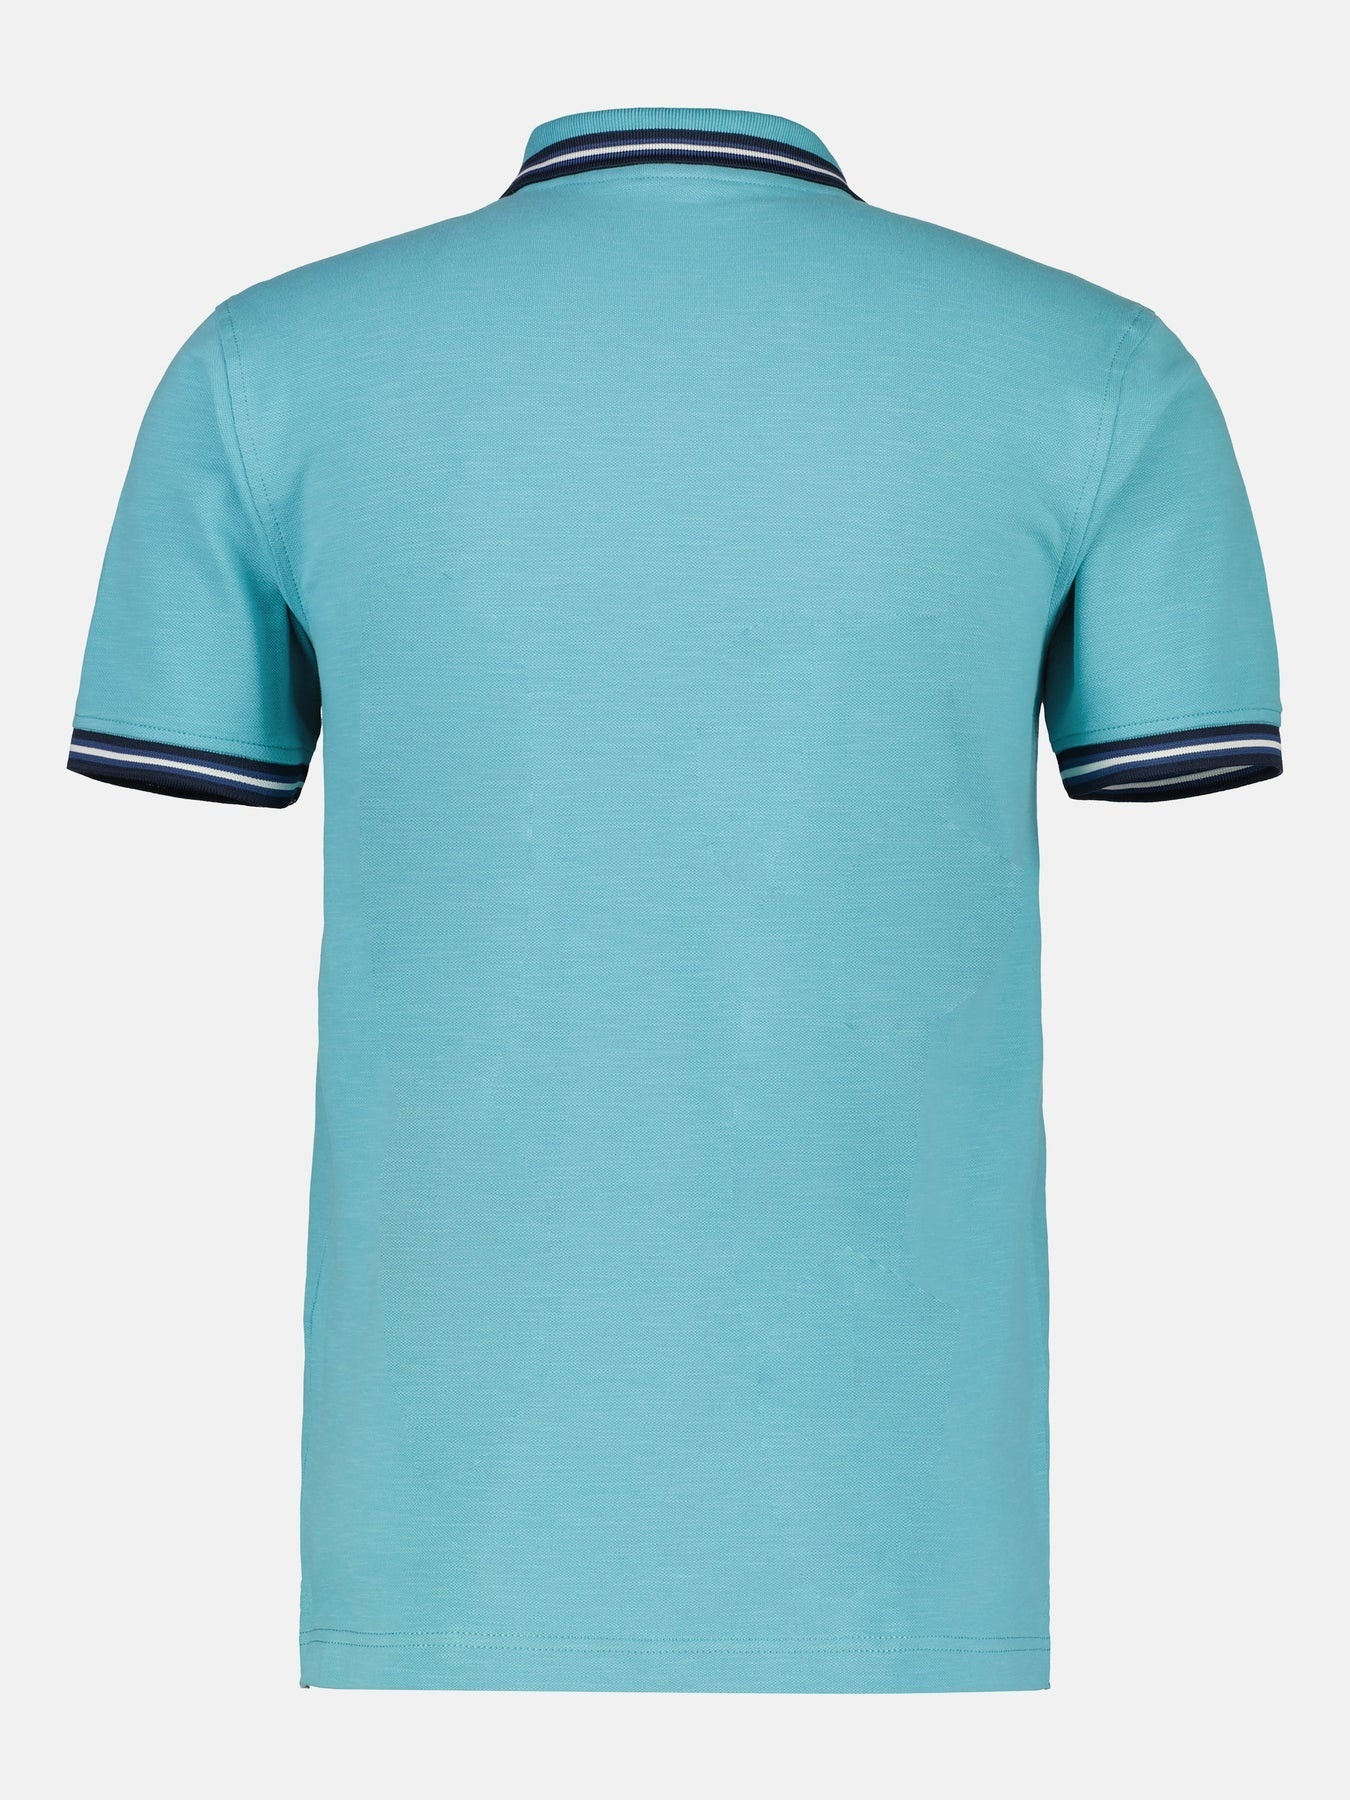 with Light | Blues Turquoise - Structure Cotton LERROS - Poloshirt